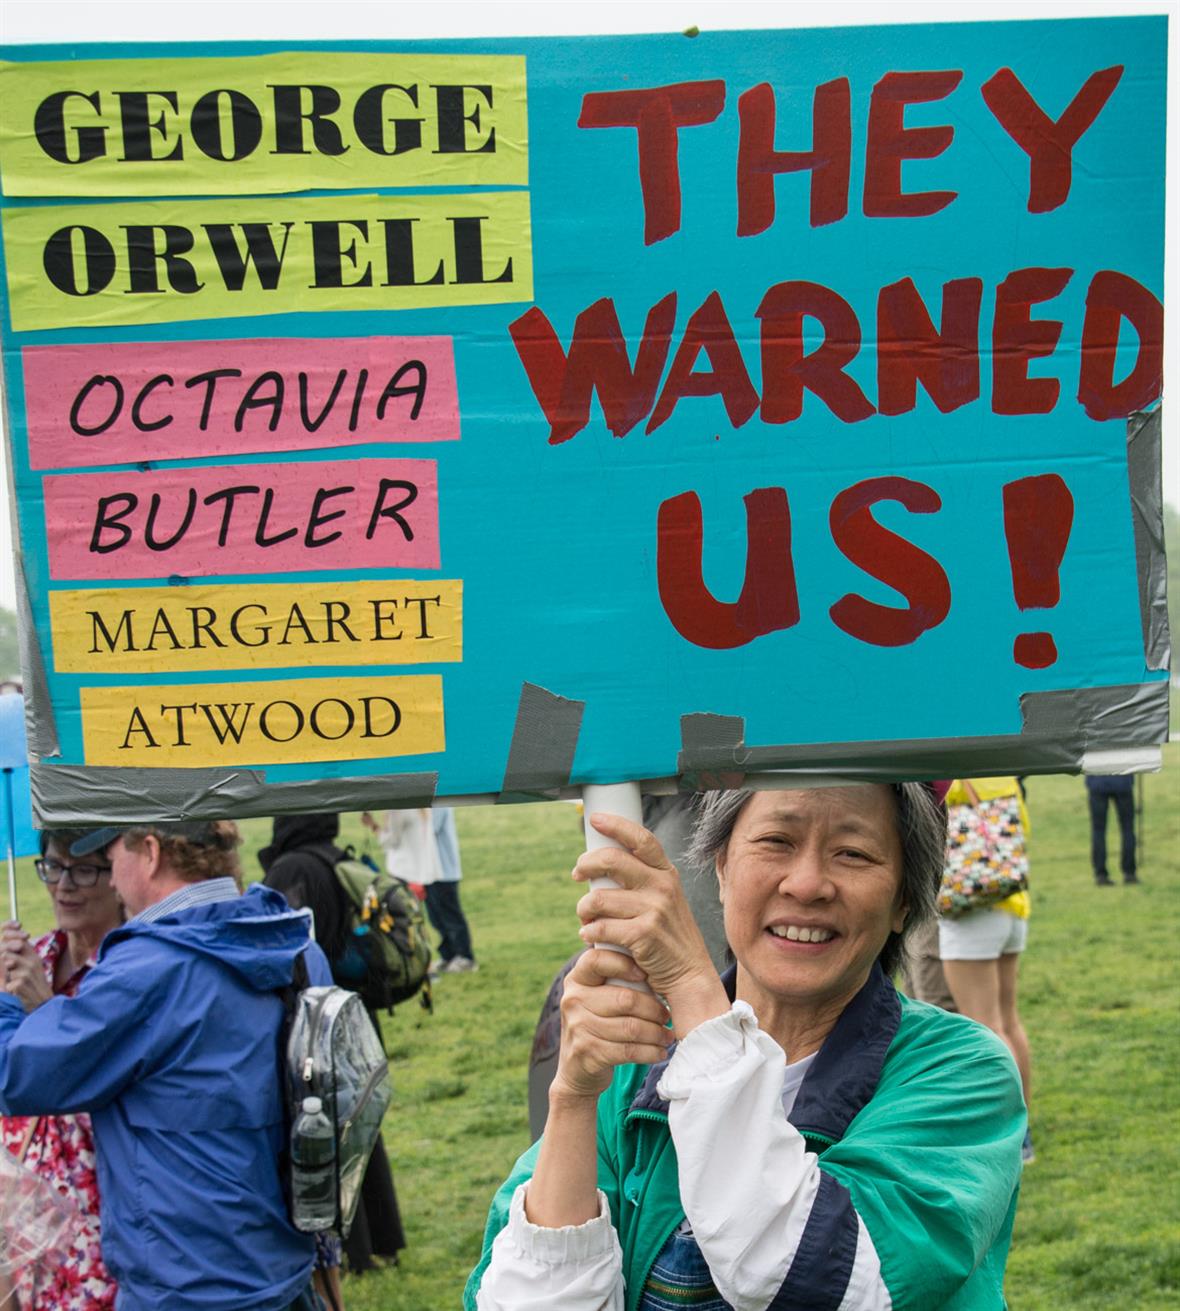 Picture of person in dispersed crowd holding picket sign that reads George Orwell Octavia Butler Margaret Atwood They Warned Us